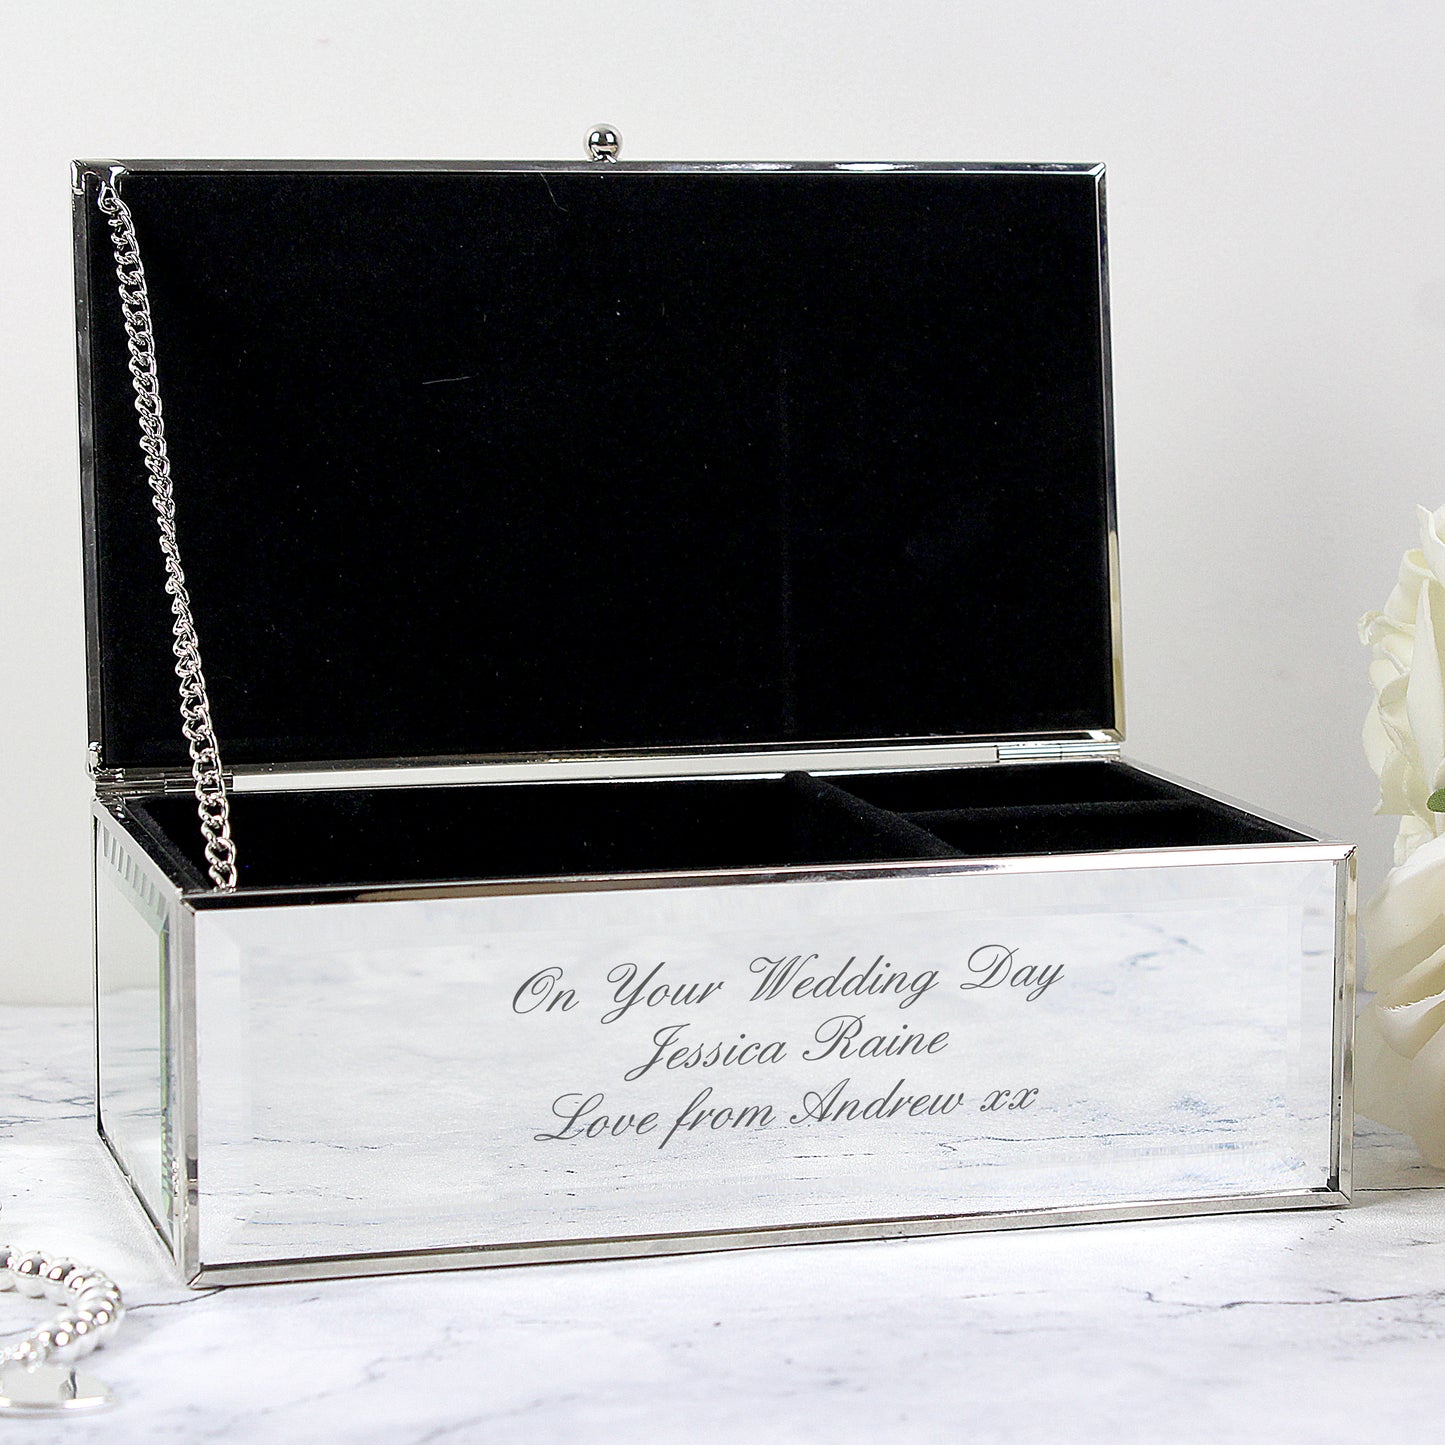 Personalised Gift Mirrored Jewellery Box Engraved with your message, Wedding Day, Valentines or Mother's Day Gift